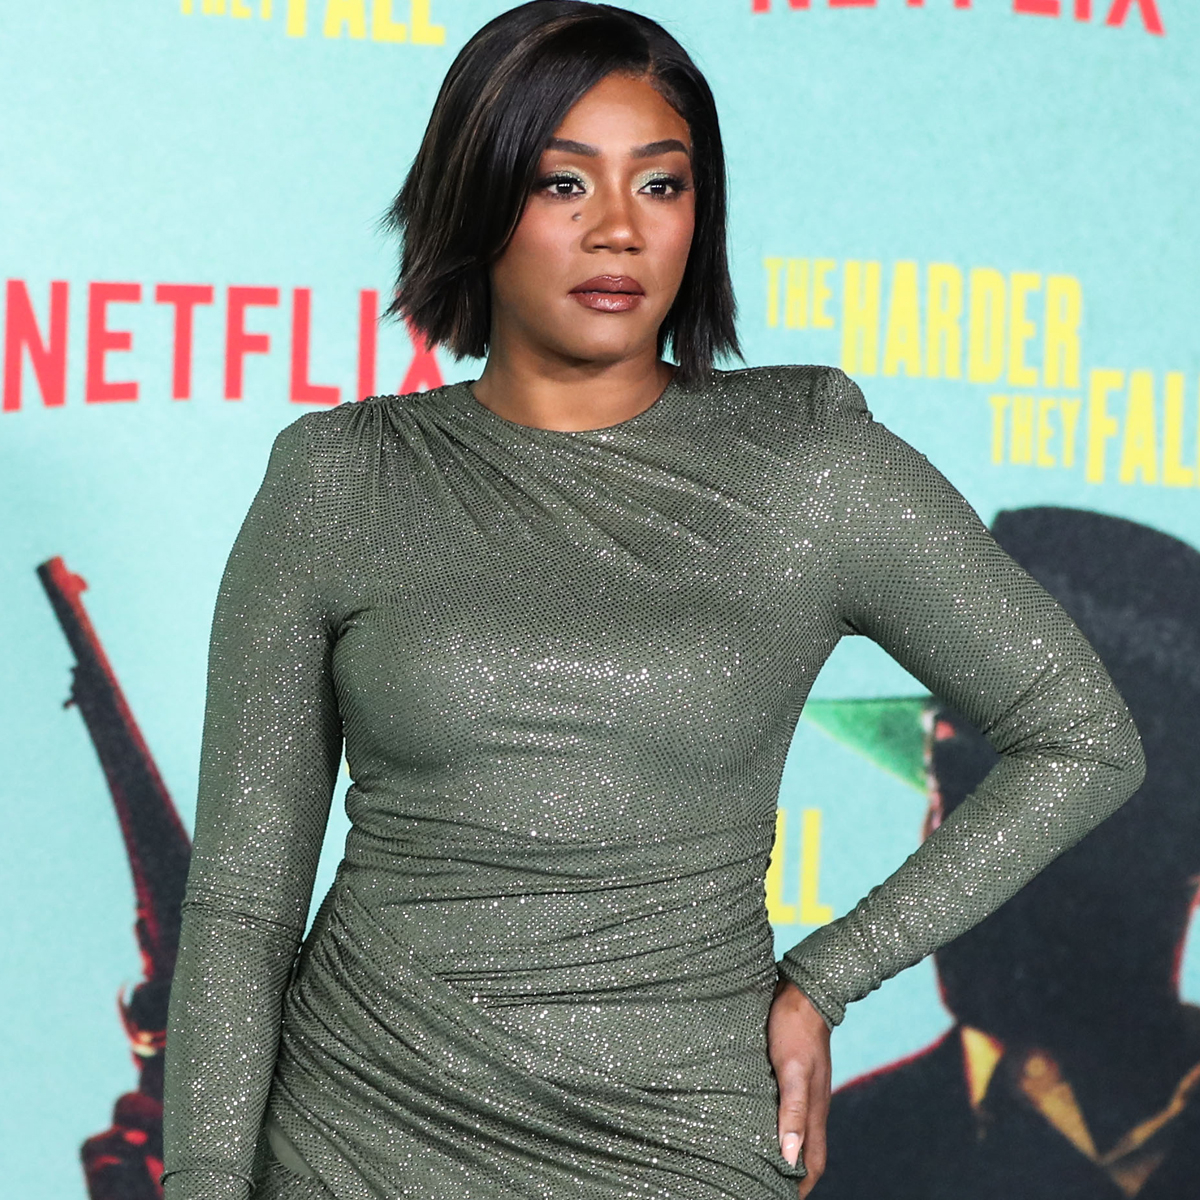 Tiffany Haddish Arrested for DUI, Allegedly Fell Asleep at the Wheel thumbnail